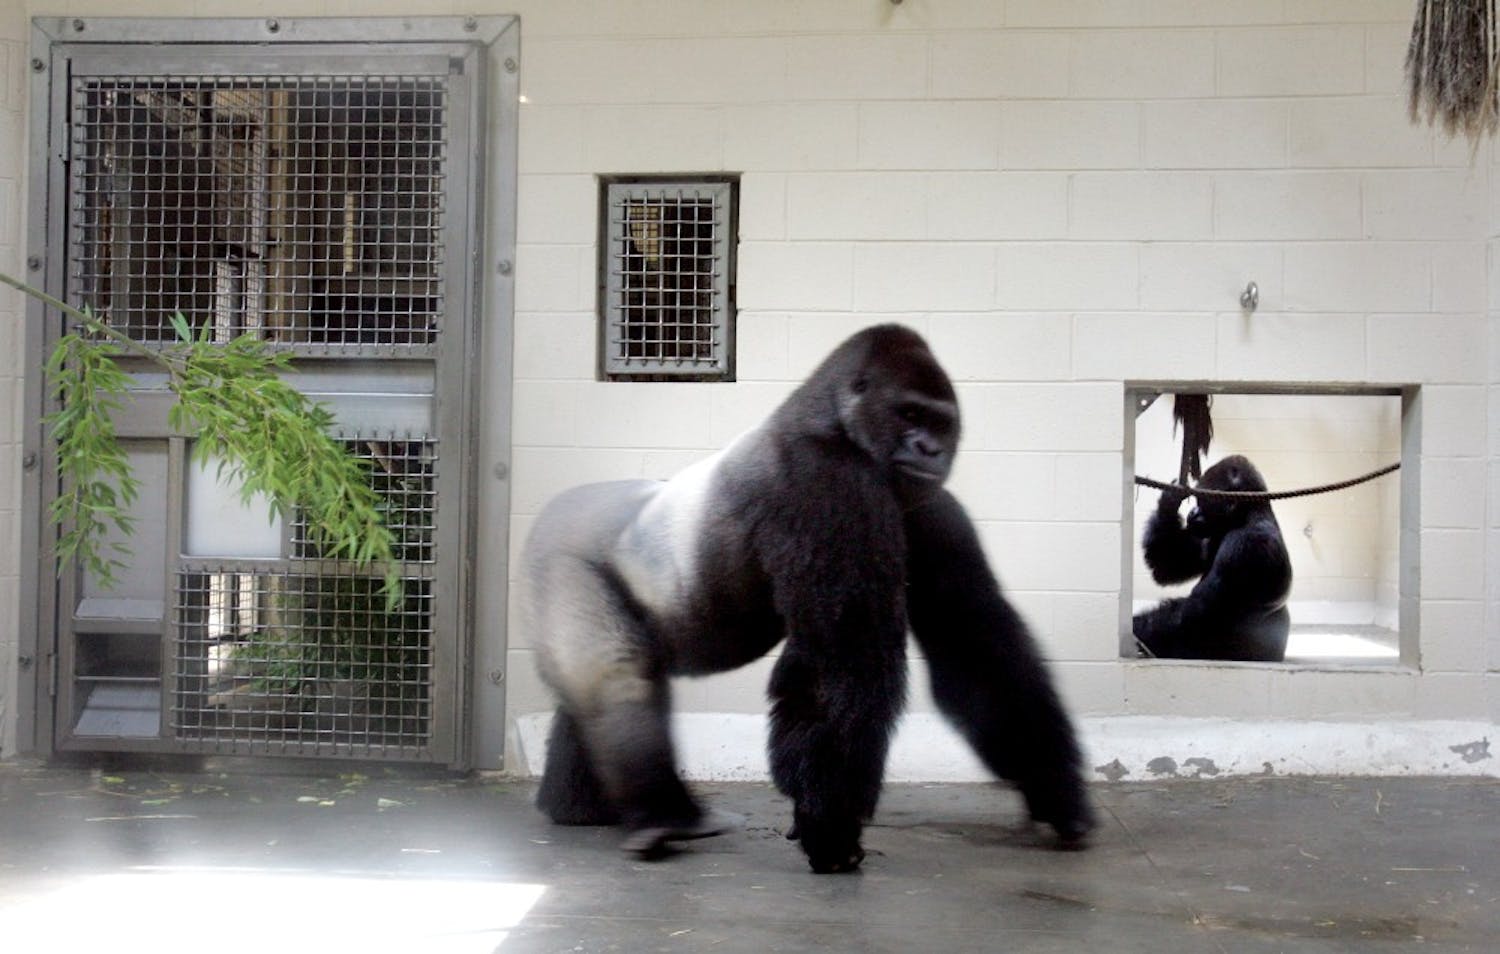 A gorilla walks his enclosure at the Riverbanks Zoo and Garden, Friday, June 12, 2009, in Columbia, South Carolina. One of the gorillas escaped from the zoo and injured an employee before returning to its enclosure, zoo spokeswoman Lindsay Burke said. (Gerry Melendez/The State/MCT)